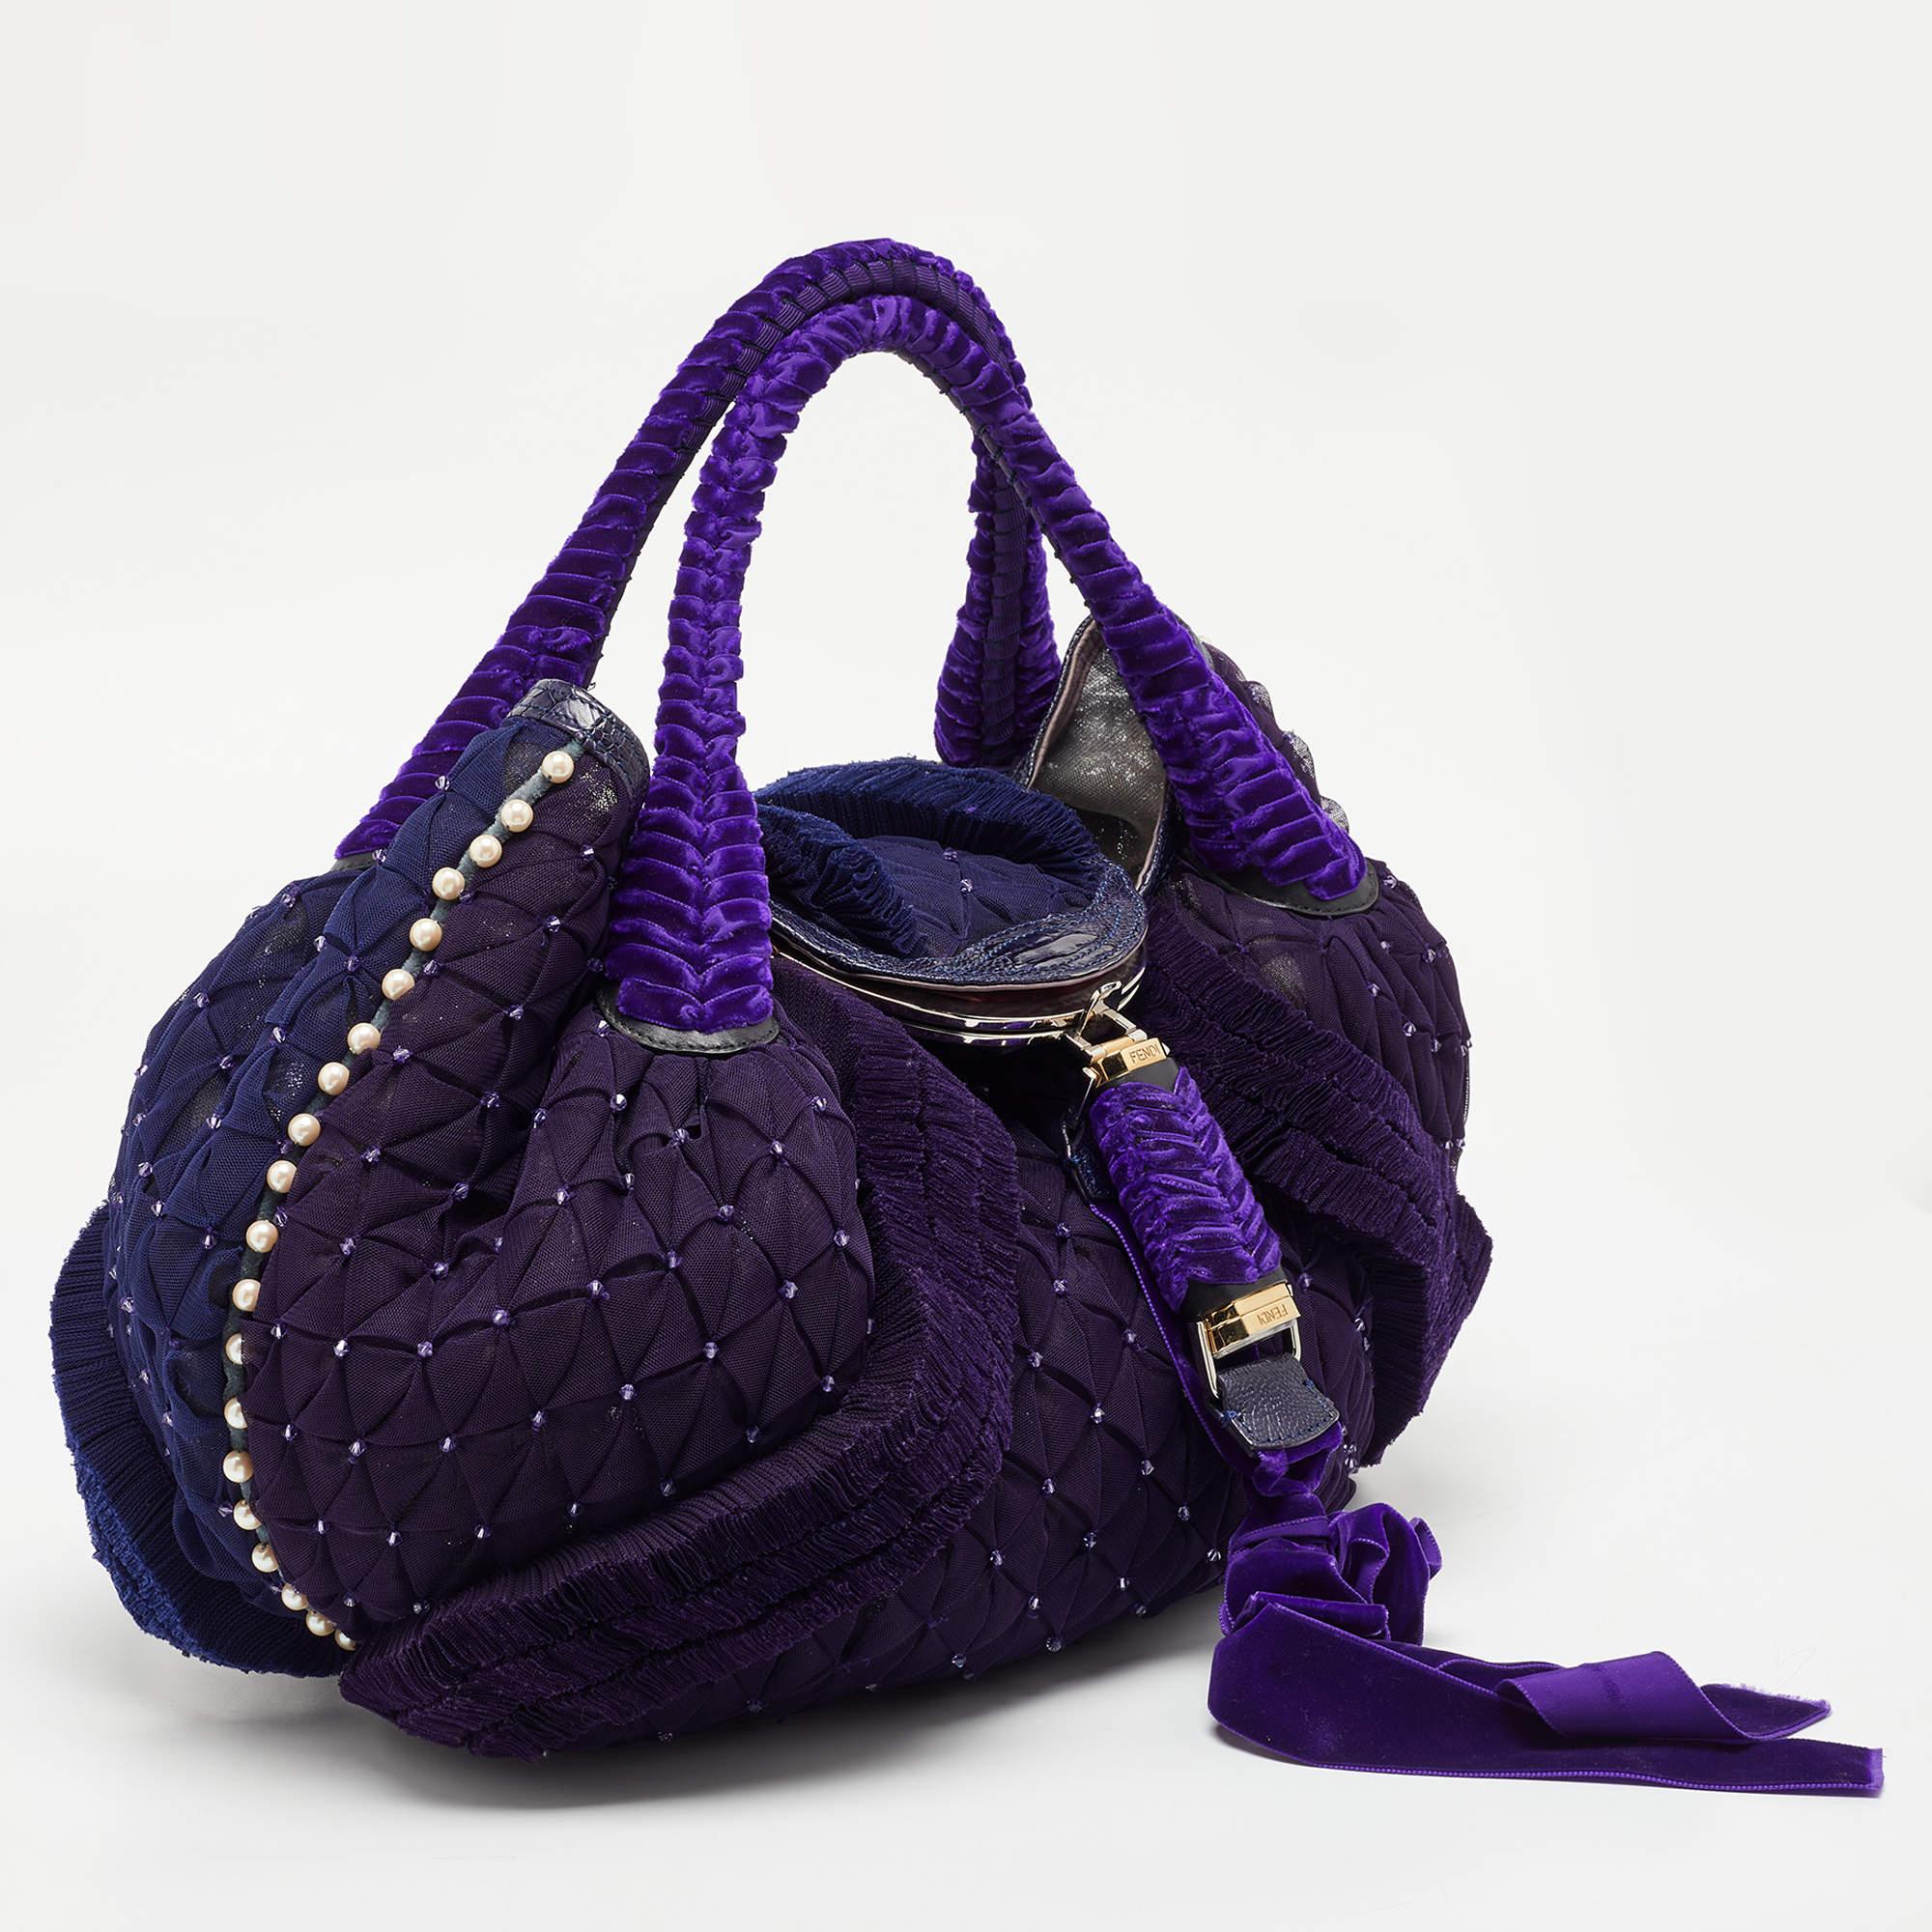 With a Fendi bag by your side, it's going to be a stylish OOTD no matter the day. Here, we have this embellished Spy hobo bag just for you. Its compact shape, stunning details, and luxe elegance make it a worthy purchase.

